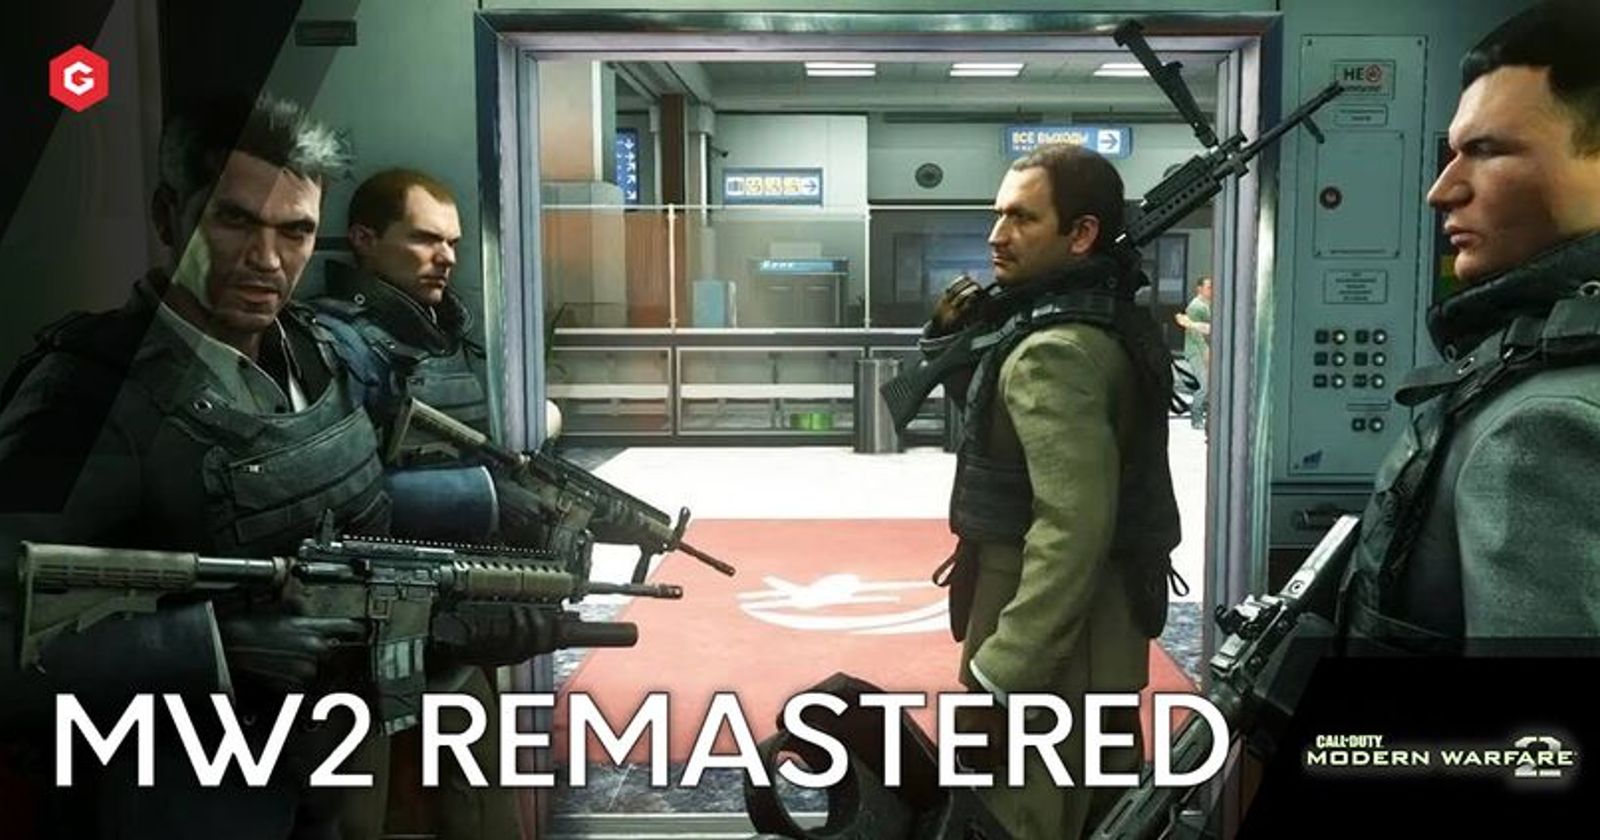 Call of Duty Modern Warfare 2 Remastered Campaign Rated By PEGI In Europe